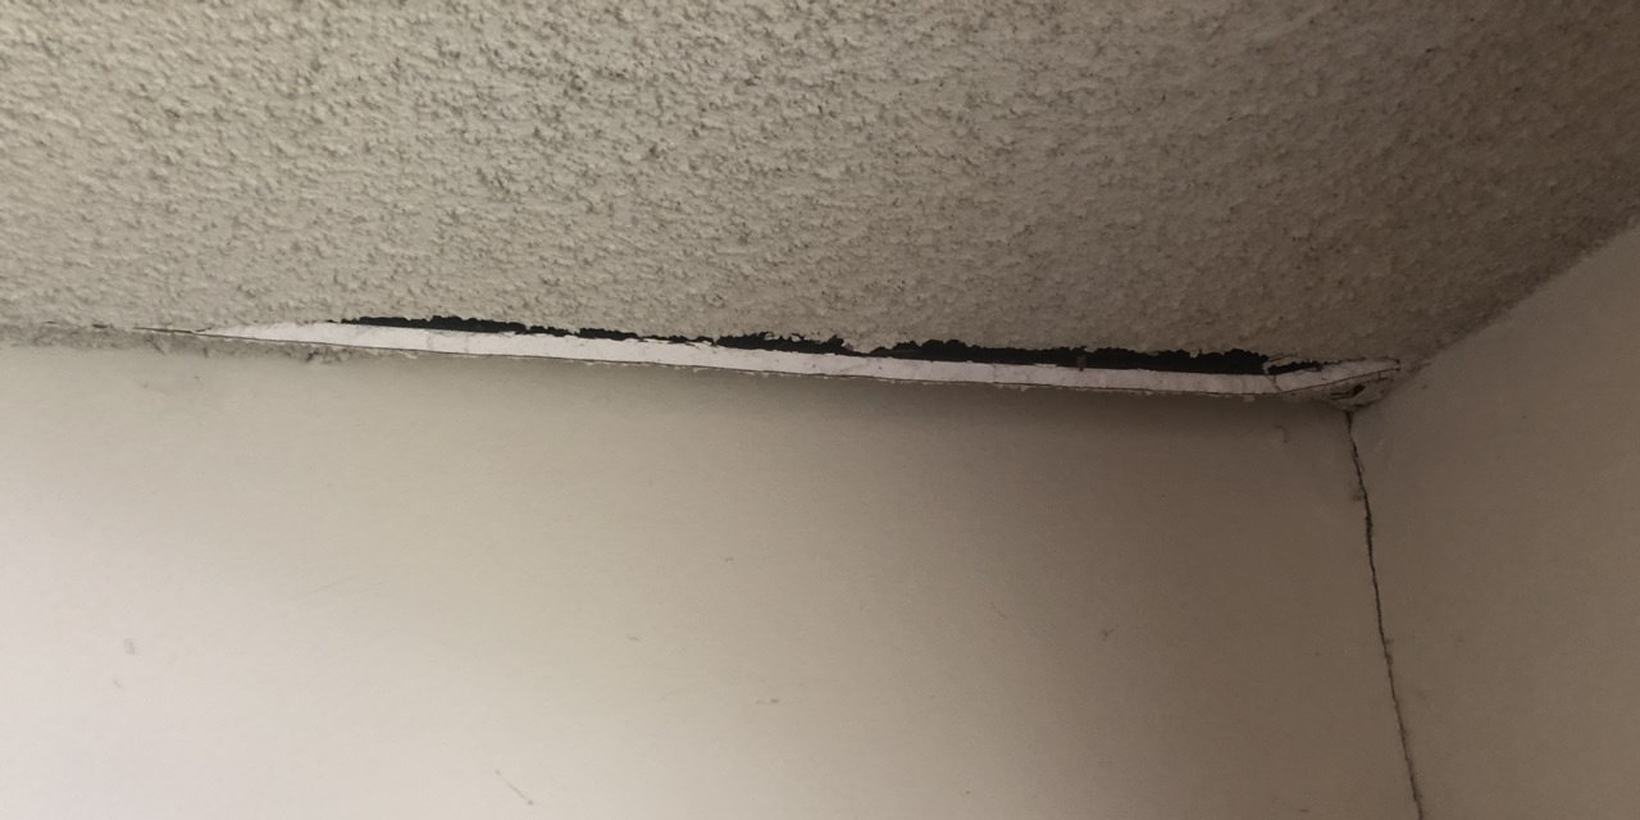 Why Do I Have Cracks in My Ceiling? (6 Types of Cracks to Look Out For)